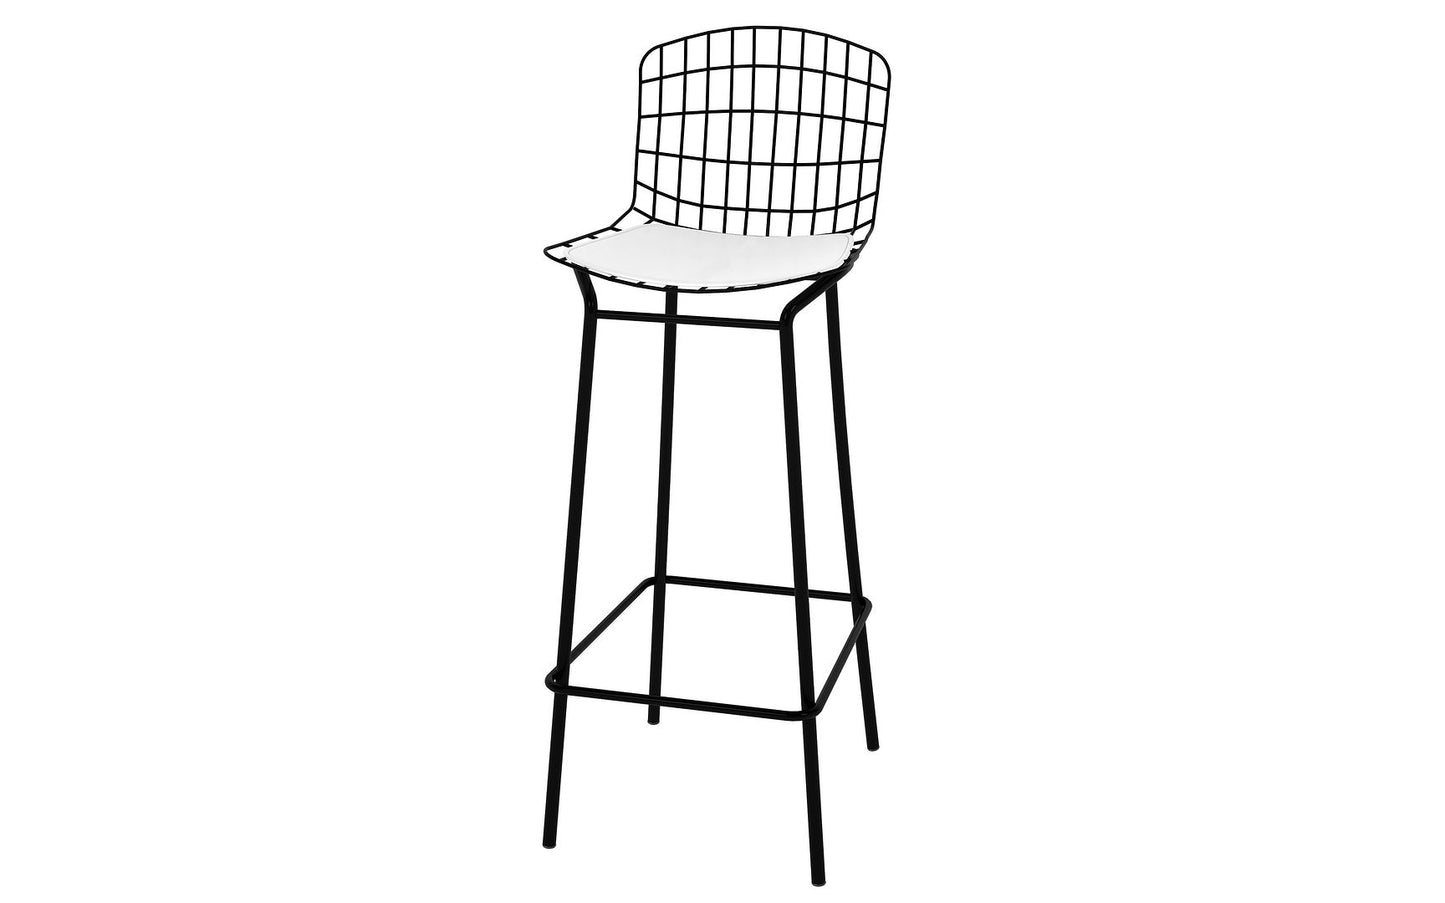 Manhattan Comfort Madeline 41.73" Barstool with Seat Cushion in Black and White (Set of 3)